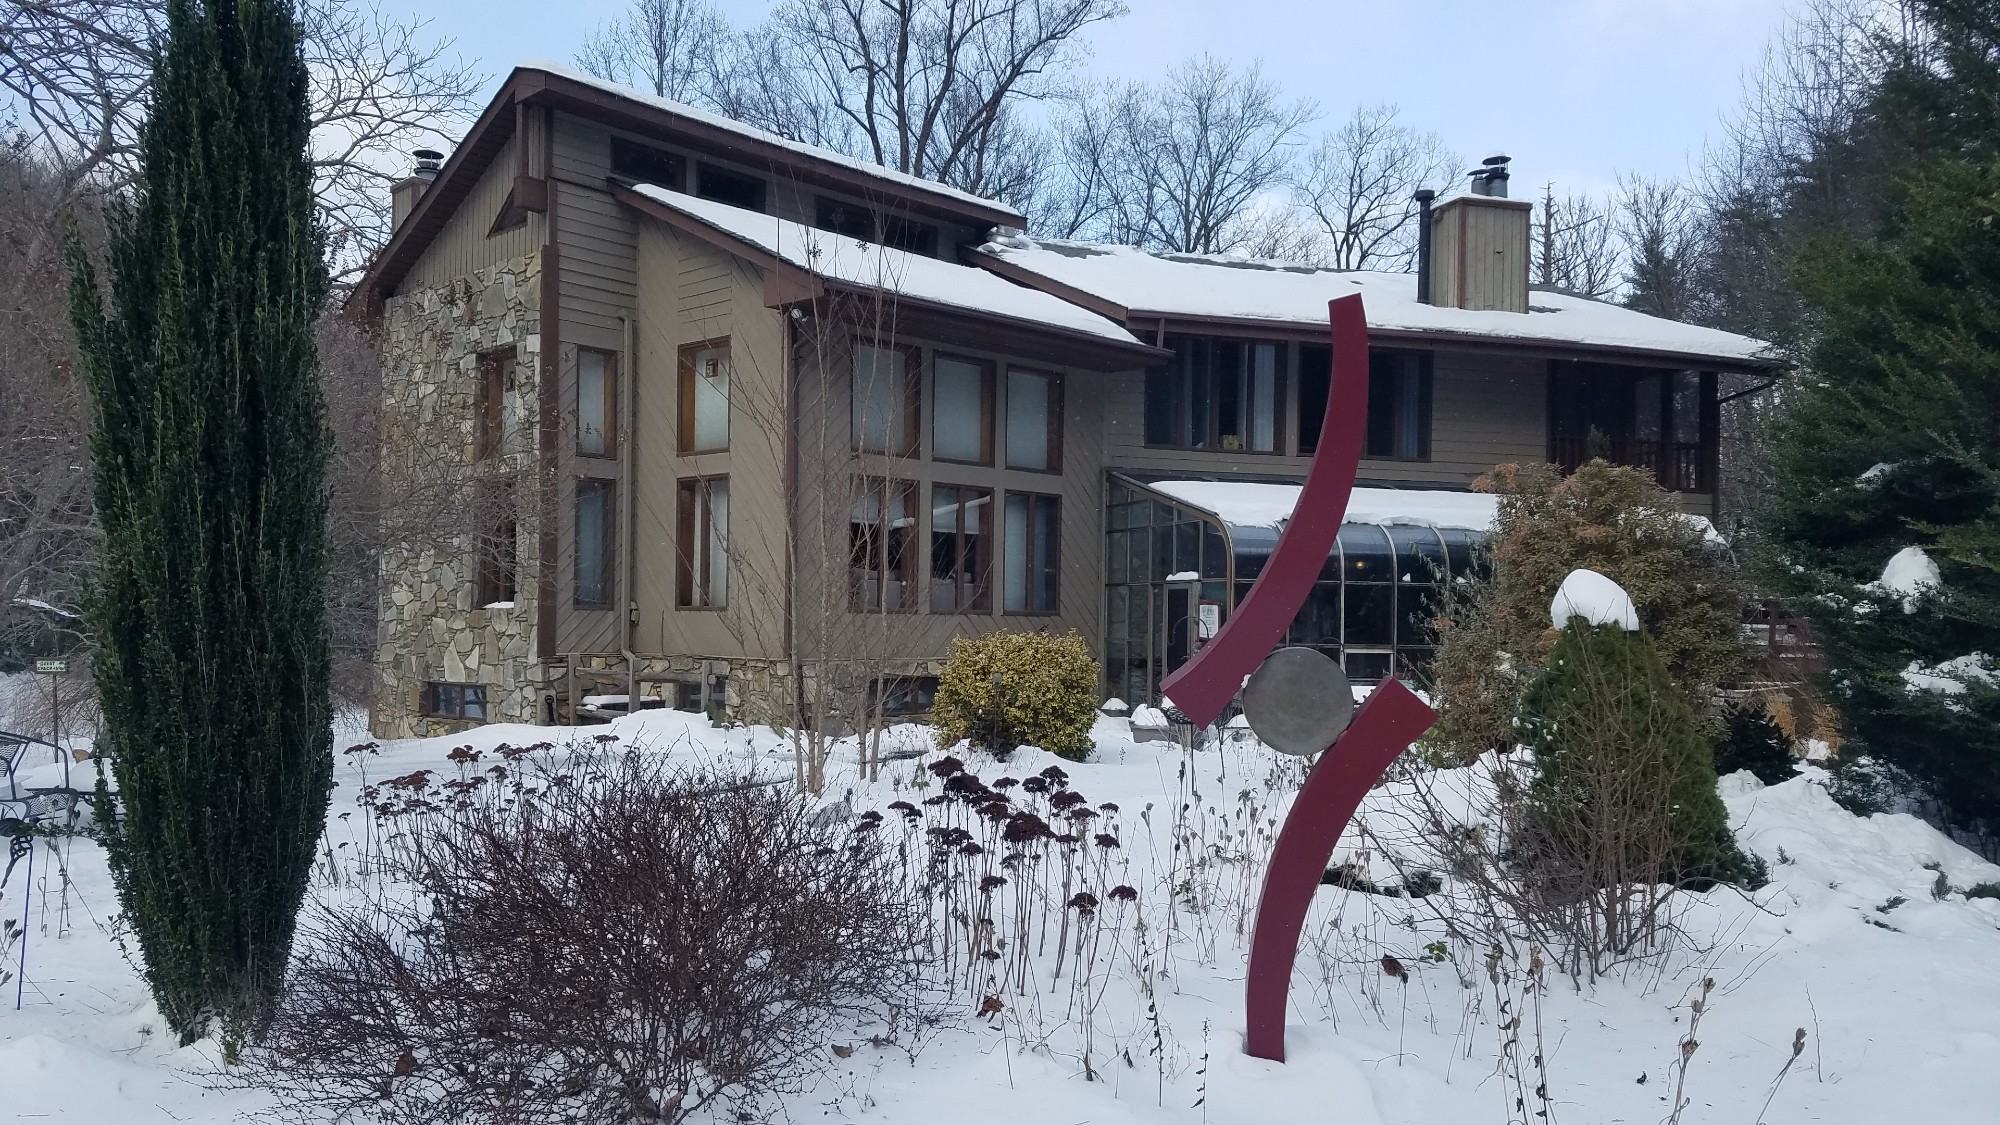 Garden sculpture with vertical curving pieces sits in the snow with lodge style home in the background